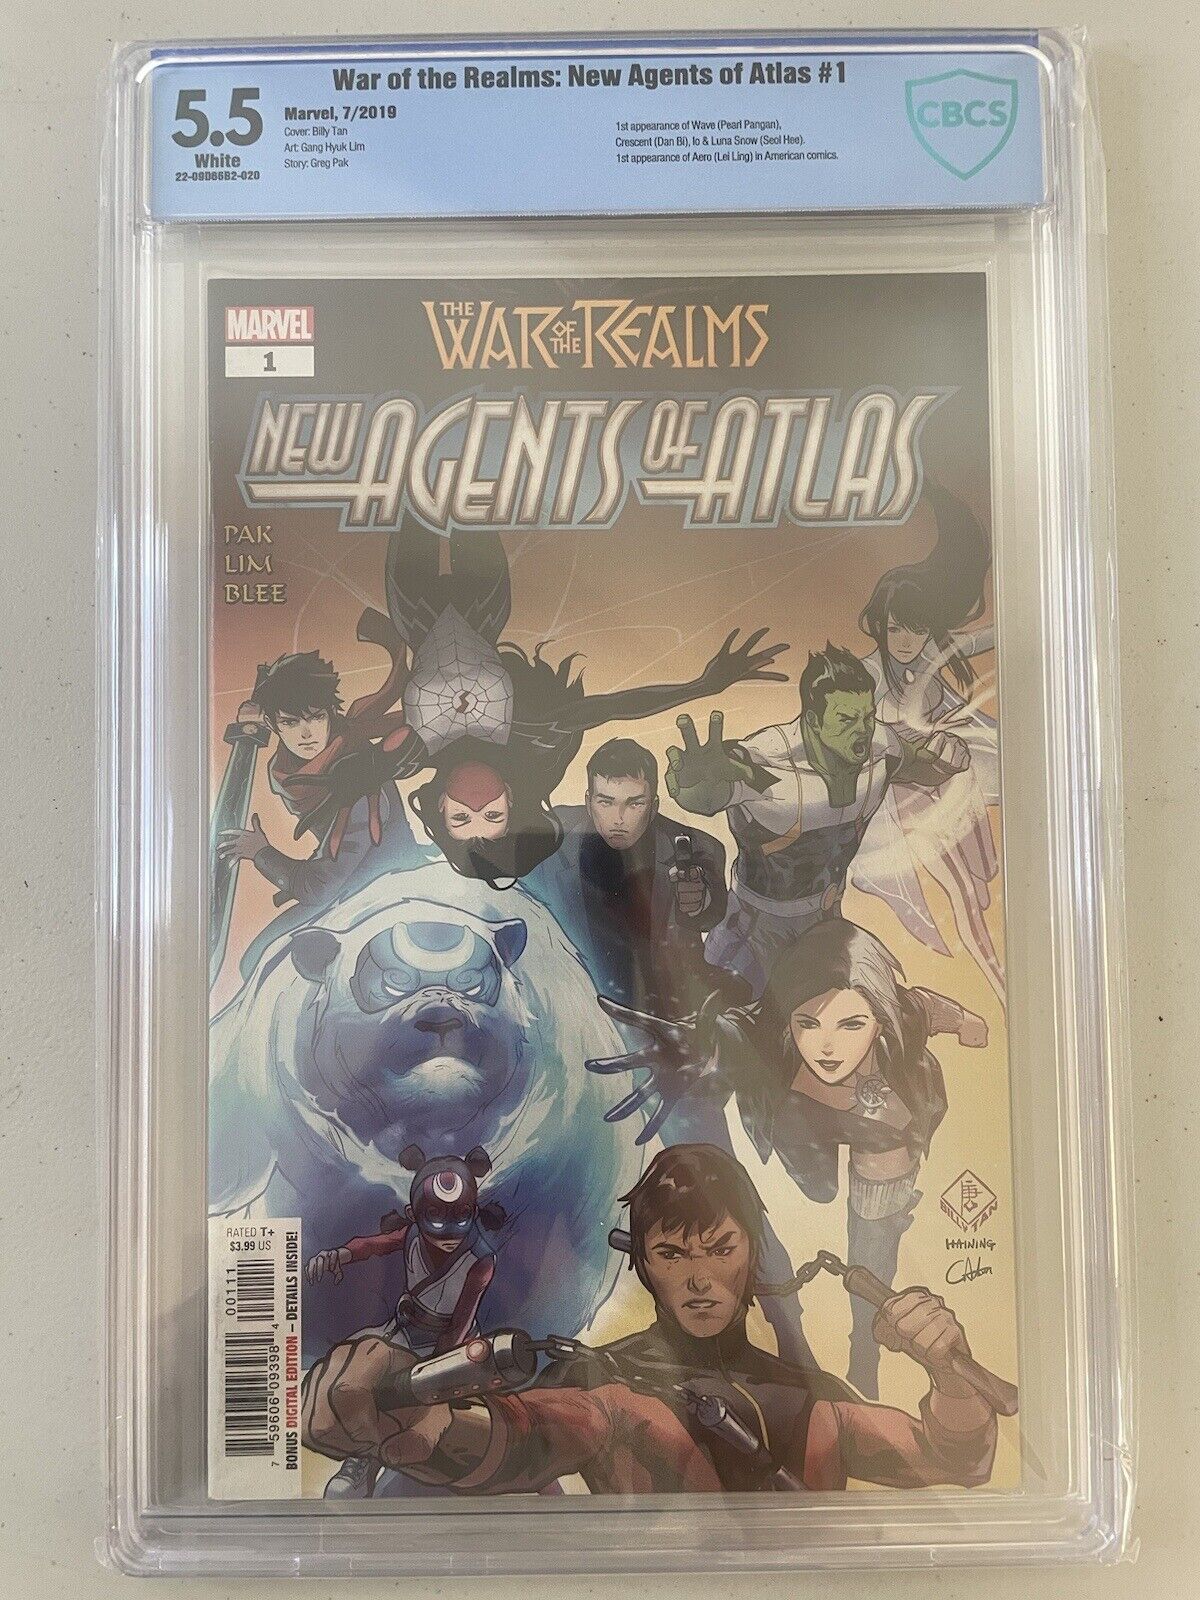 War of the Realms New Agents of ATLAS #1 Billy Tan Cover (Marvel, 2019)